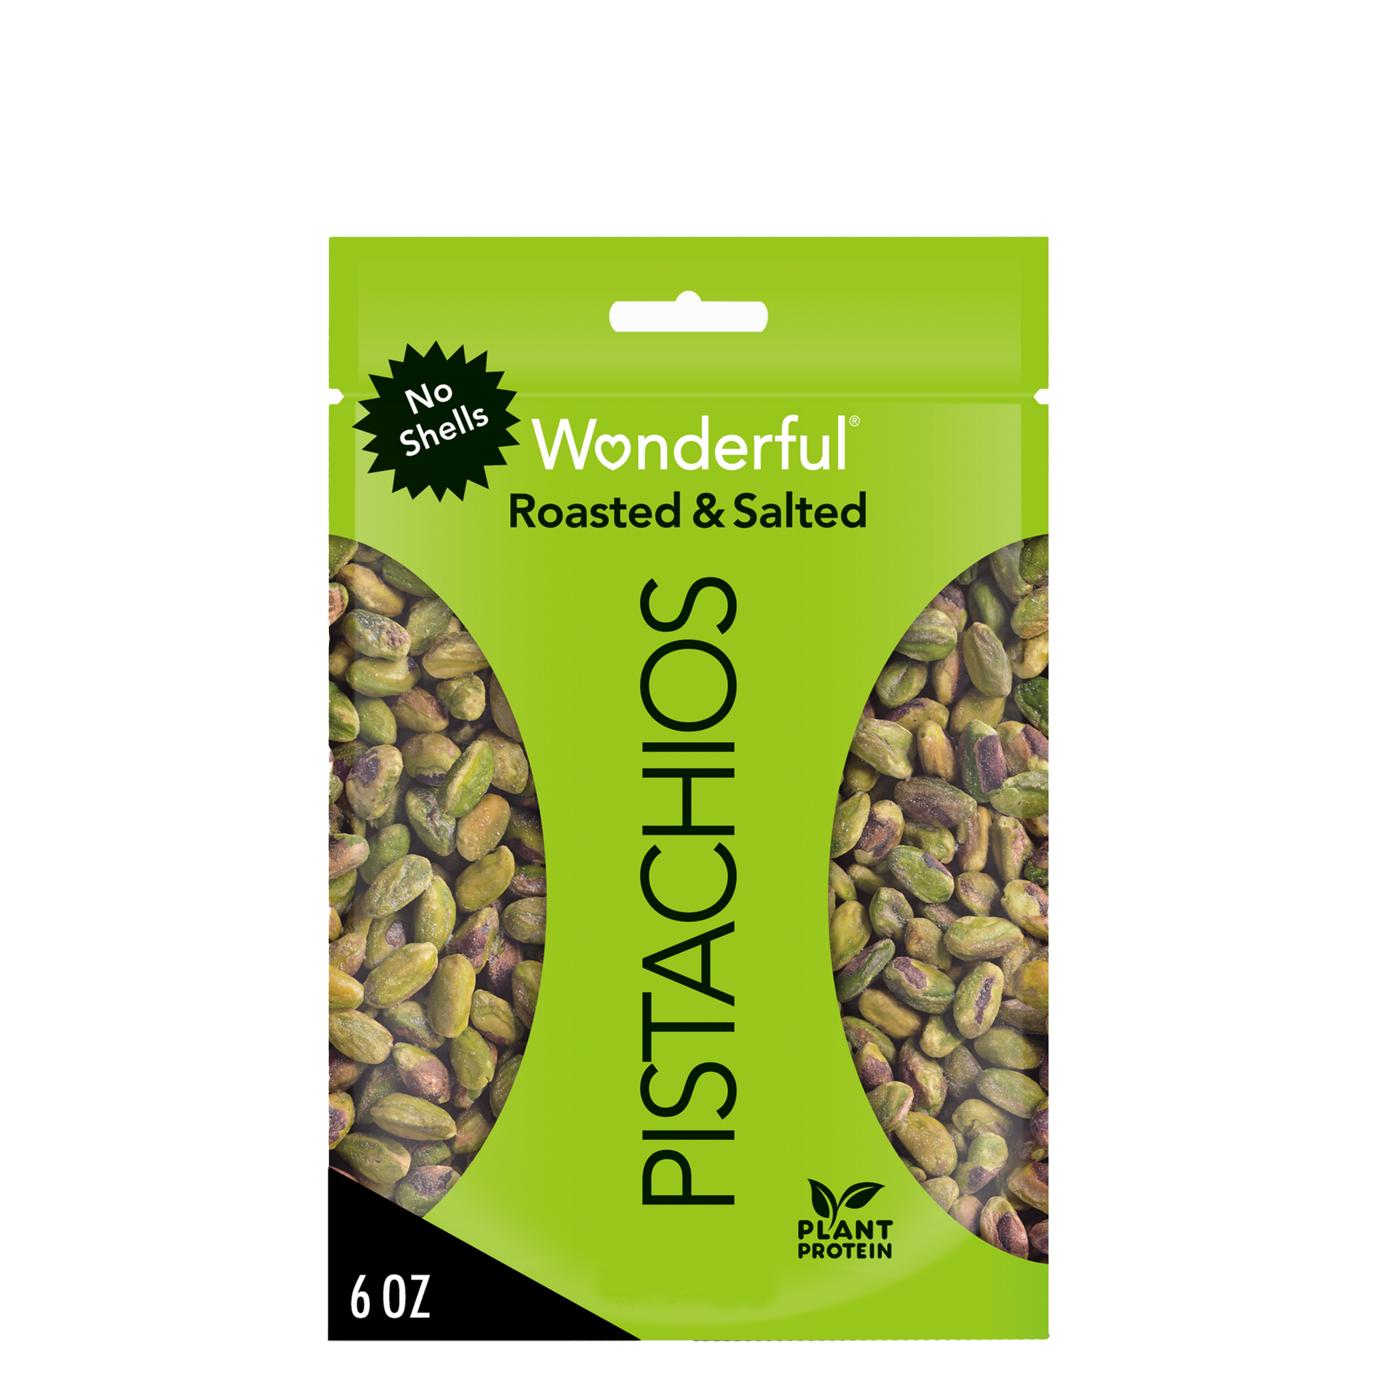 Wonderful Roasted Salted No Shell Pistachios; image 1 of 7